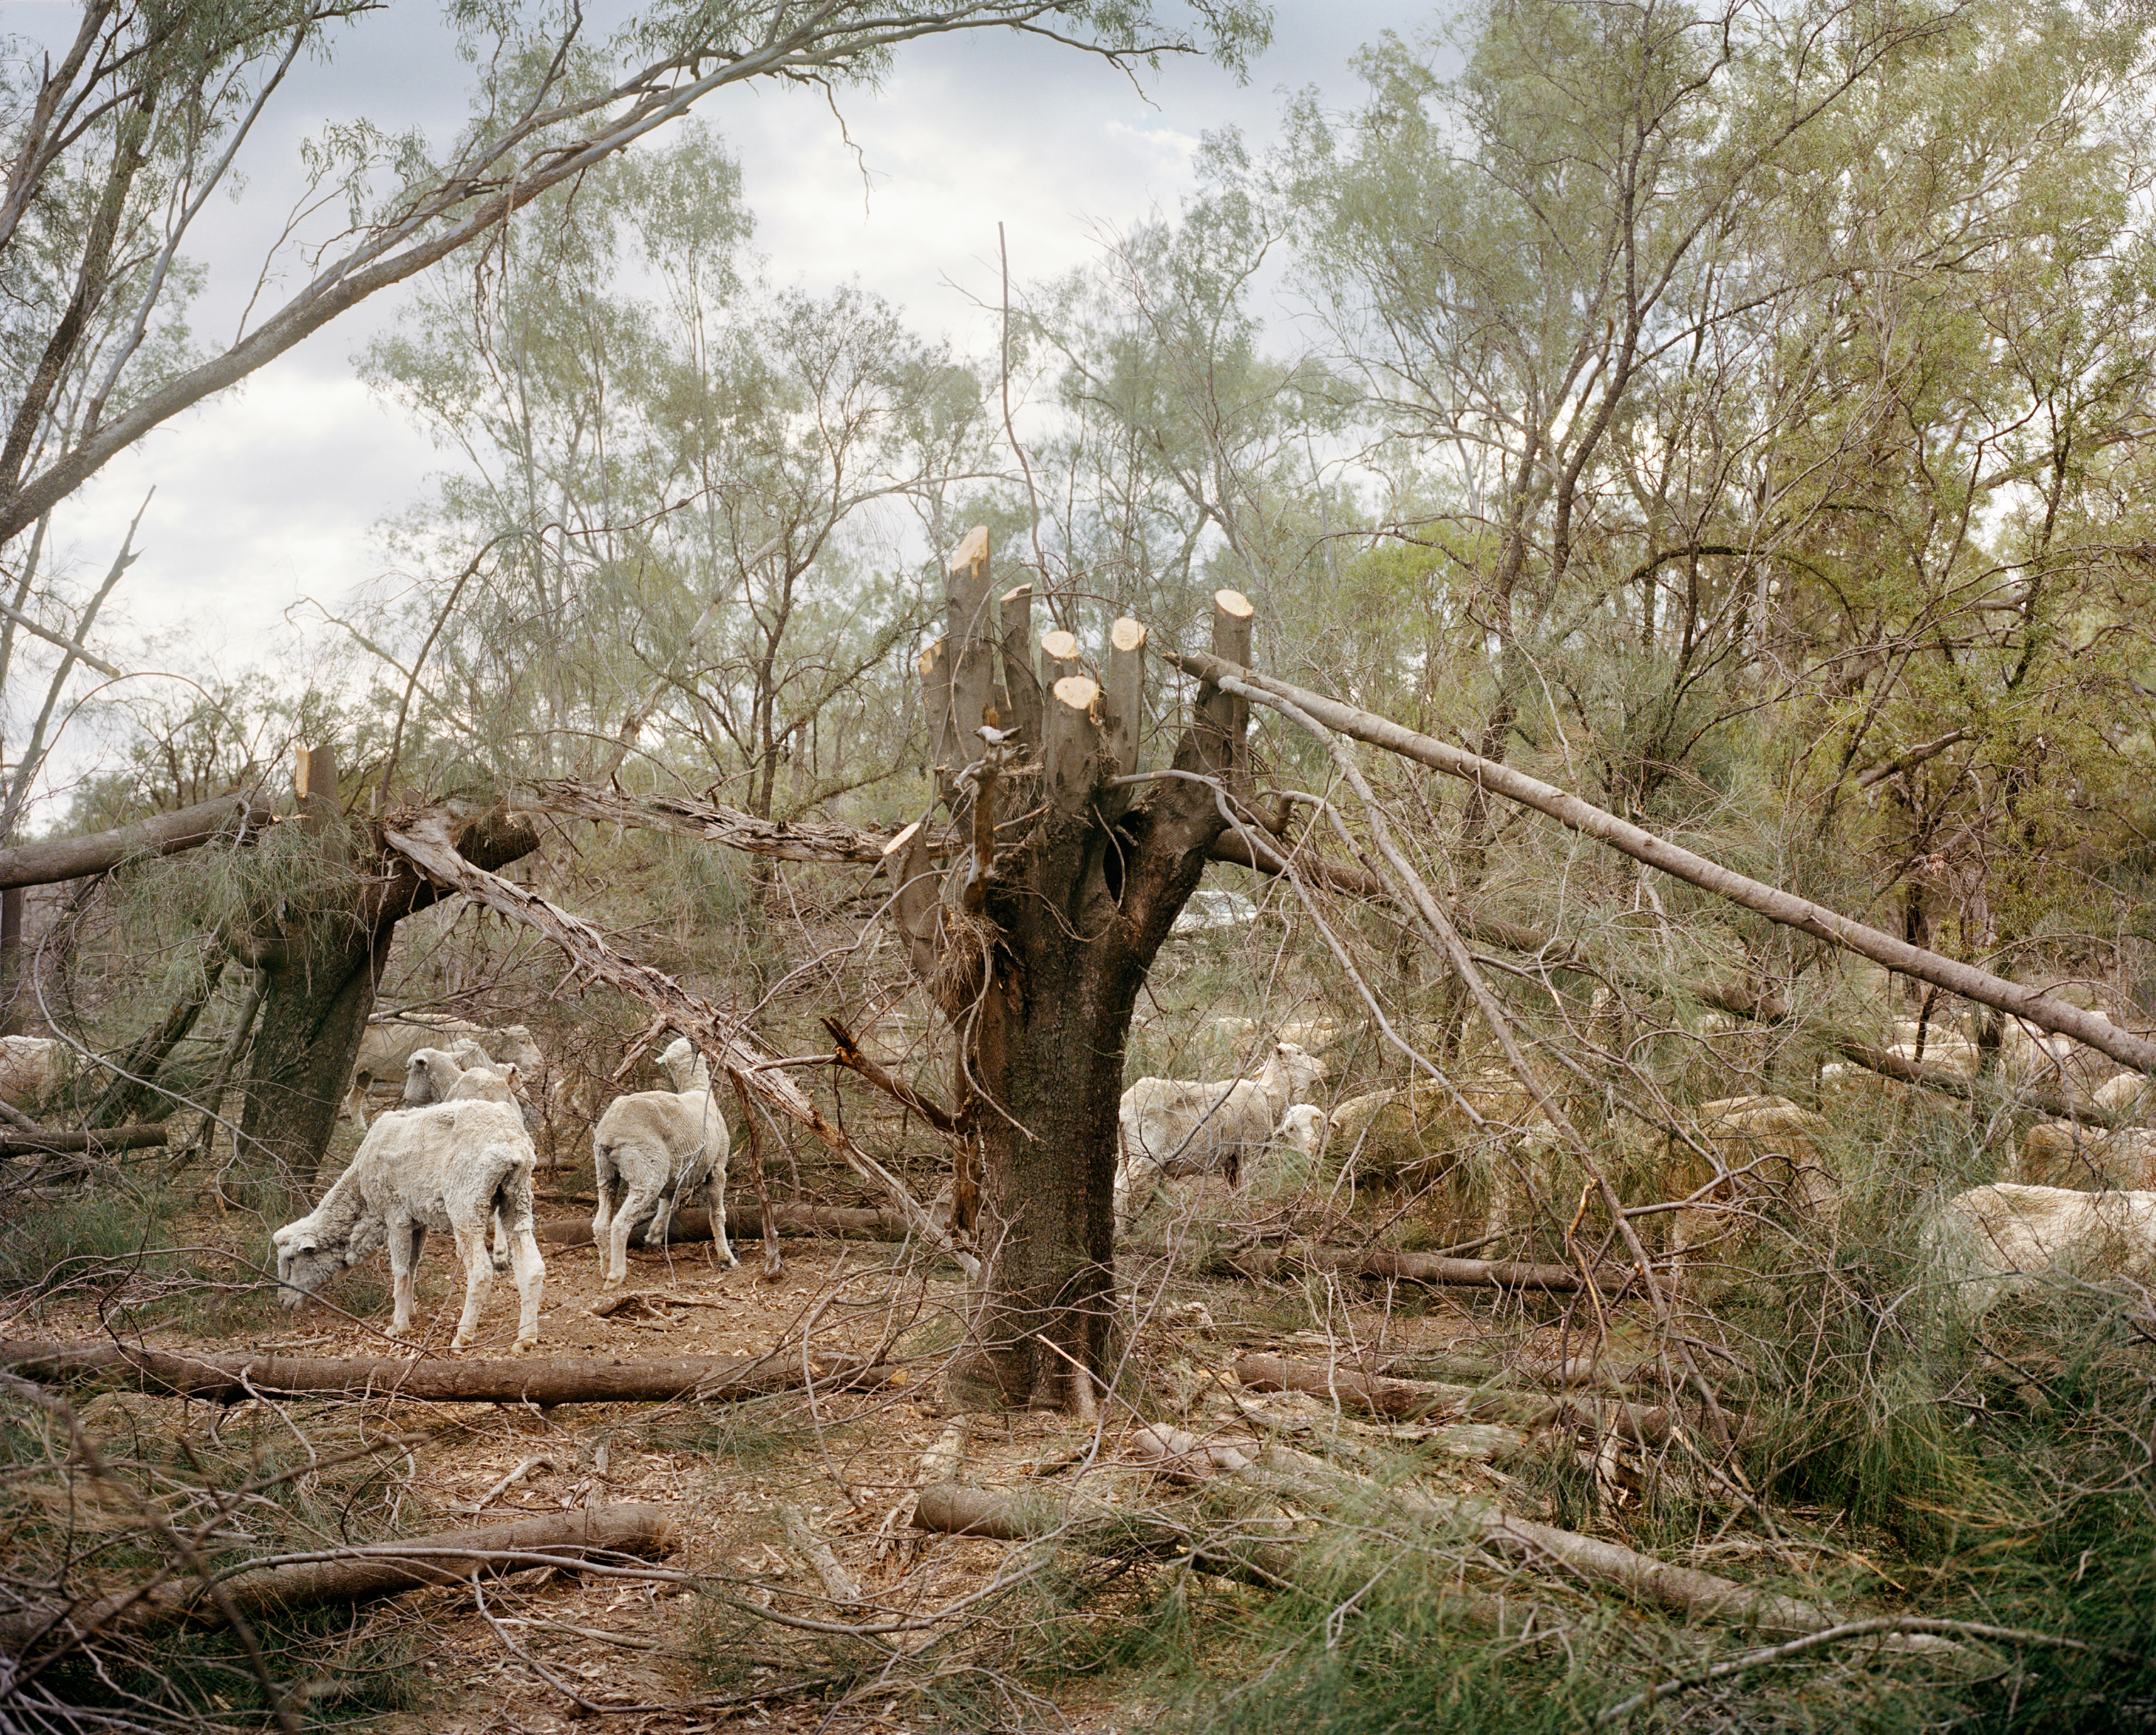 Sheep graze on branches cut by farmer David Cross on a farm near Hebel, along the New South Wales-Queensland border, in November. Cross chops the branches or whole trees several times a week, instead of buying costly feed. (Adam Ferguson for TIME)